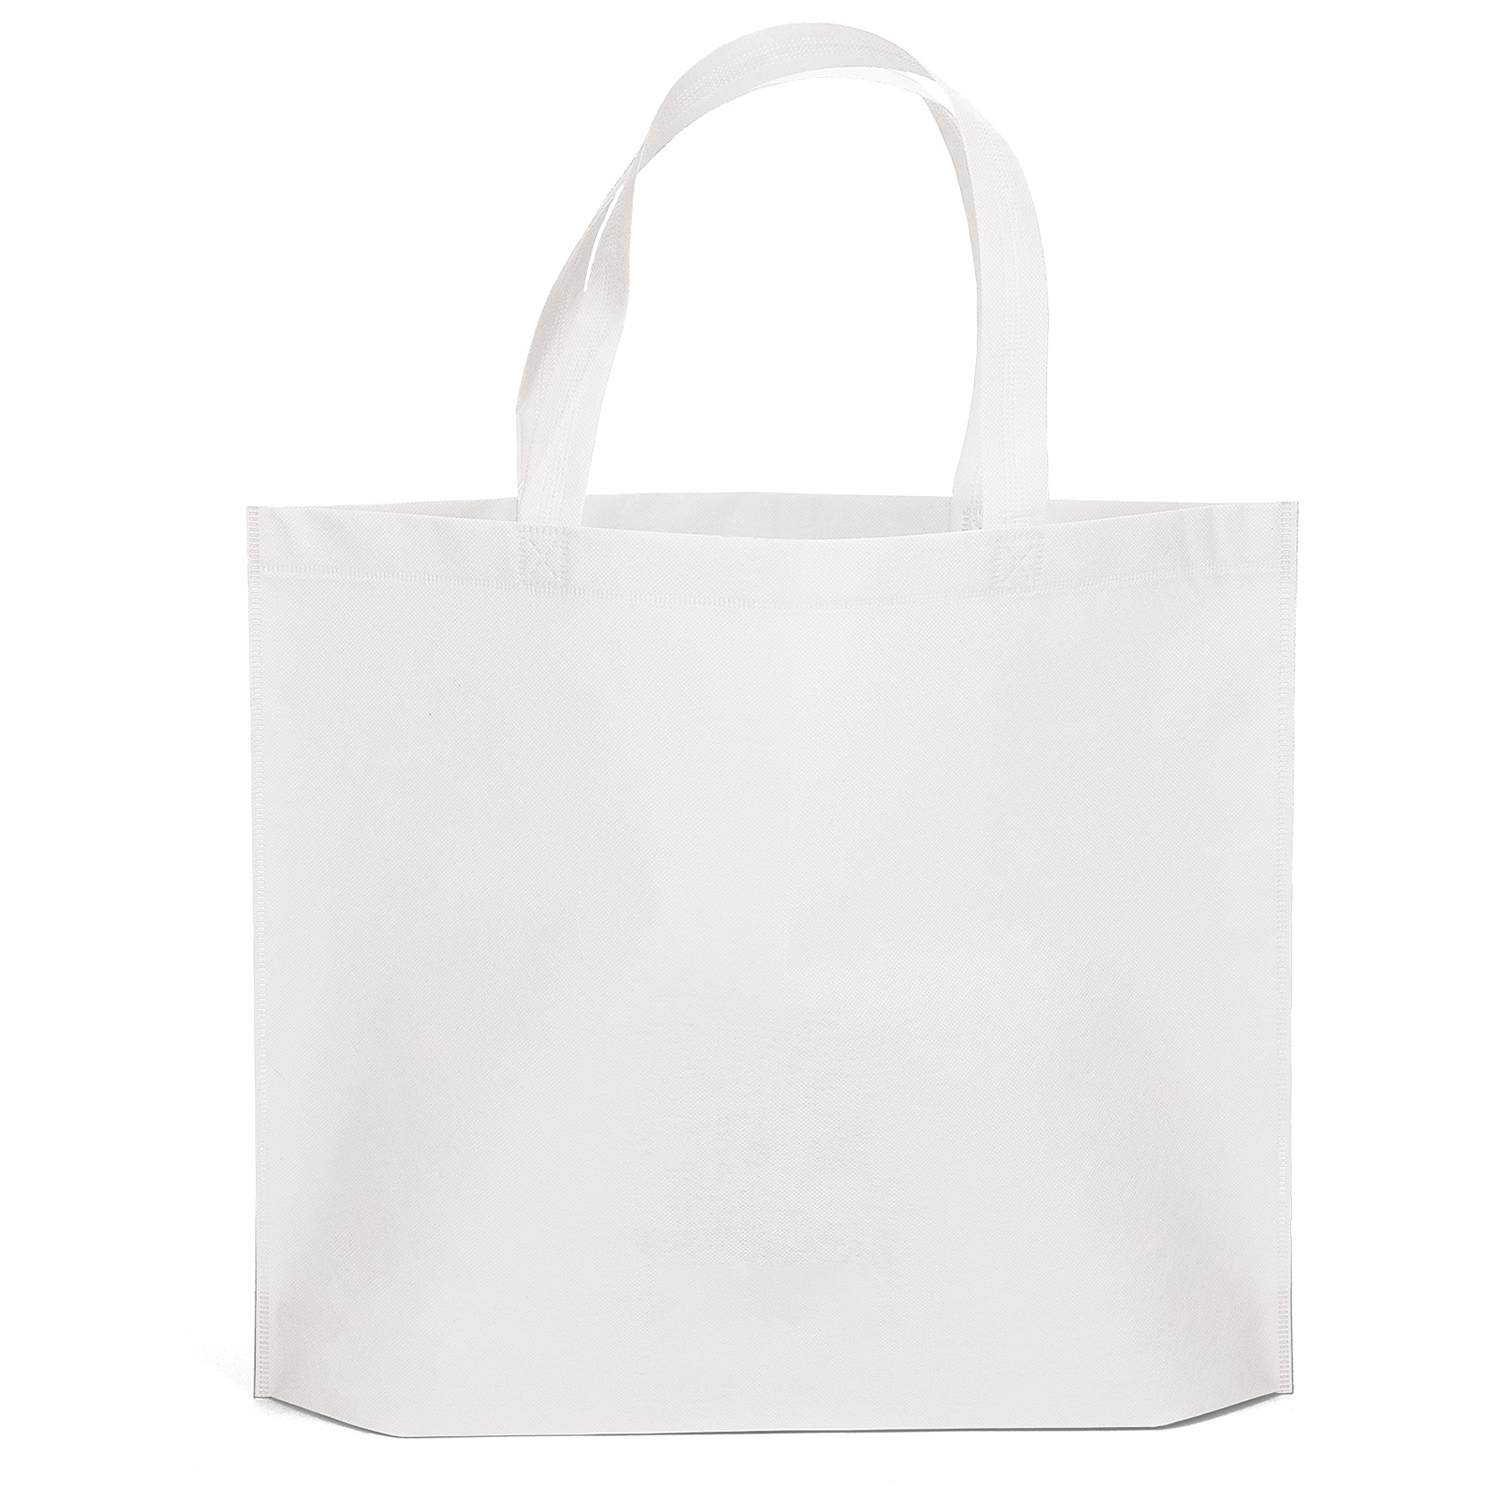 Bag Makers DYTH1915 - Custom Printed Eco-Friendly Promotional Non-Woven Grocery Tote Bag